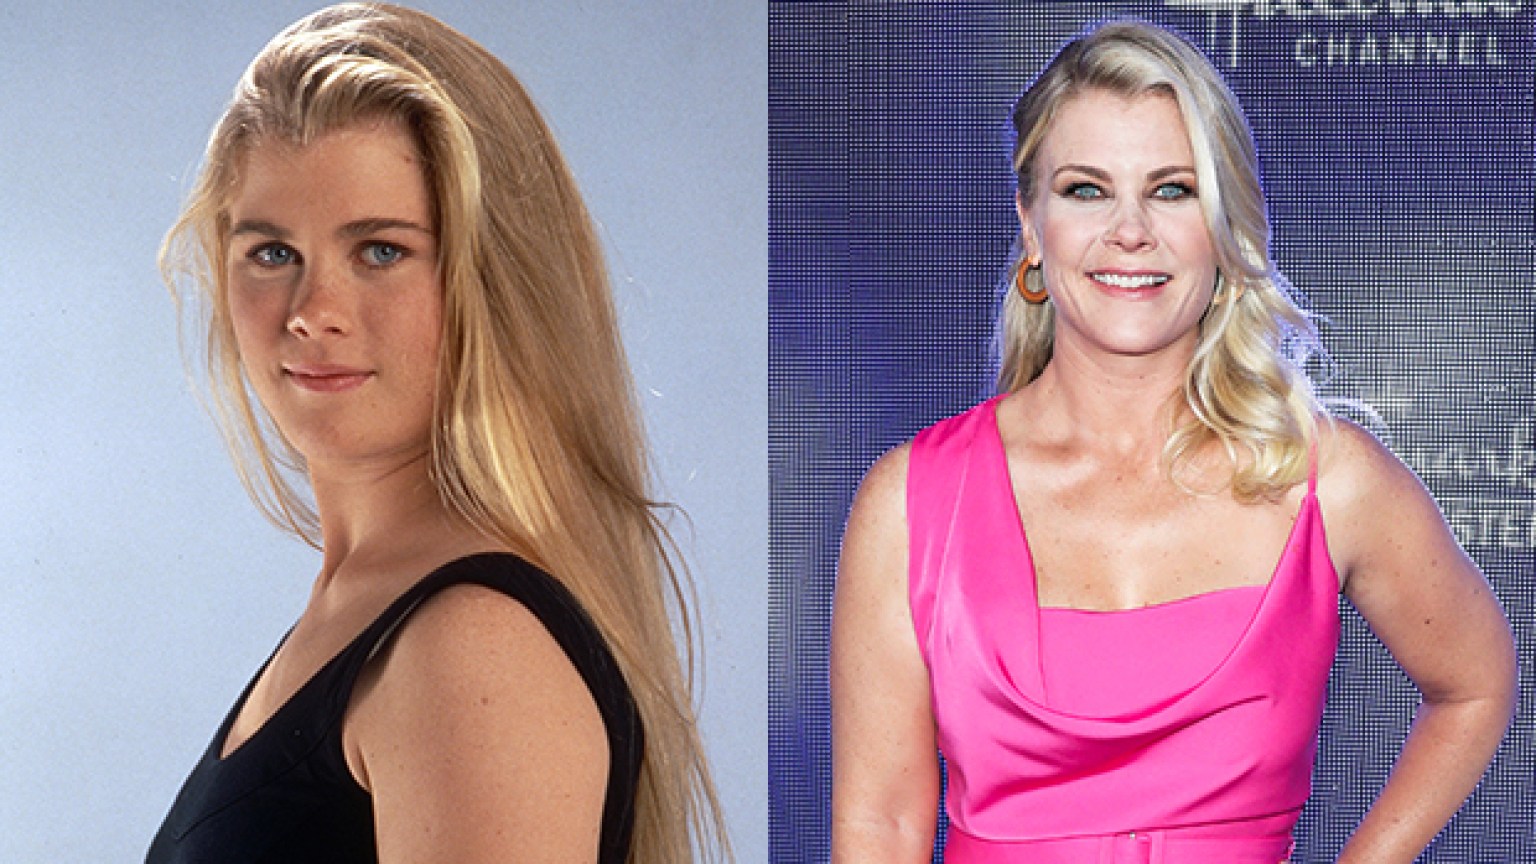 Alison Sweeney Days Of Our Lives Ftr ?resize=1536%2C864